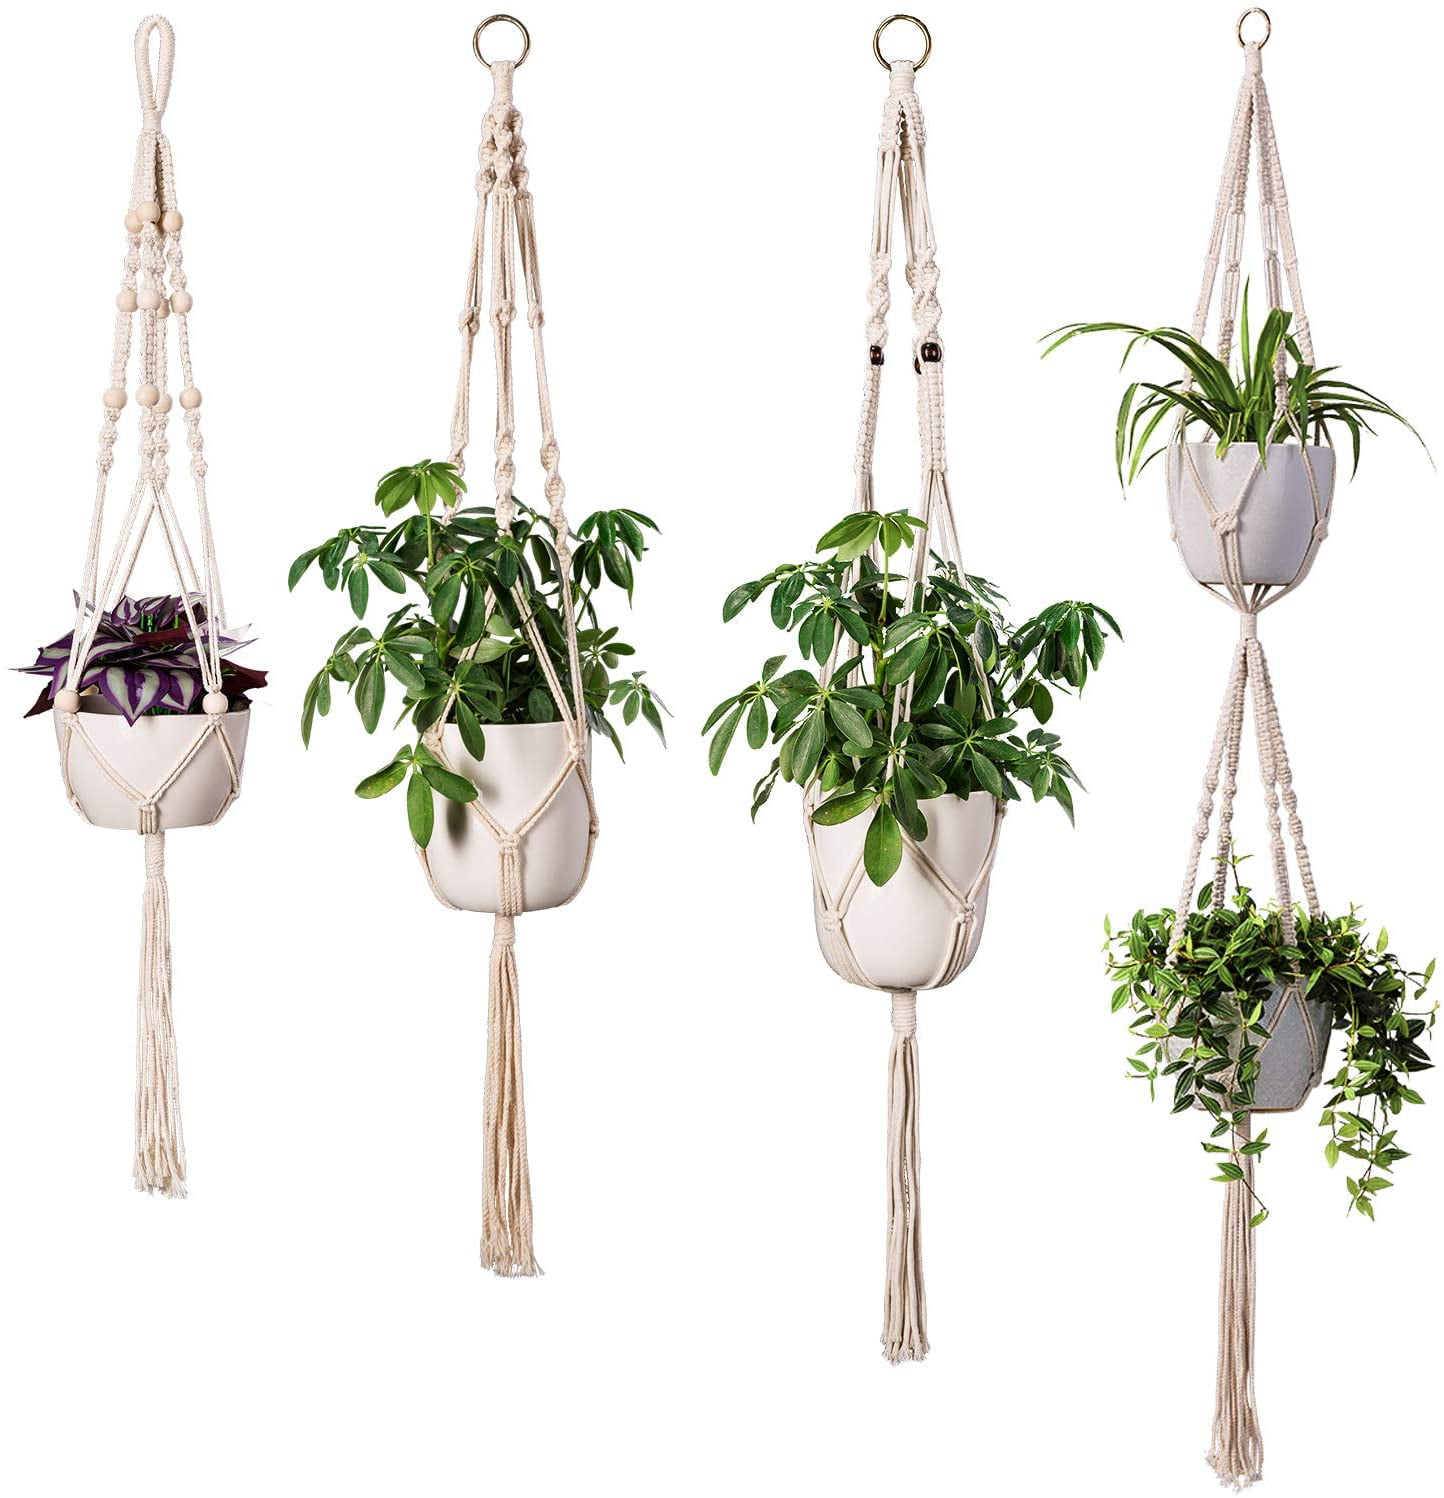 UNUSUAL GIFT QUALITY CHUNKY HANDCRAFTED MACRAME WALL PLANT/BASKET HANGER 